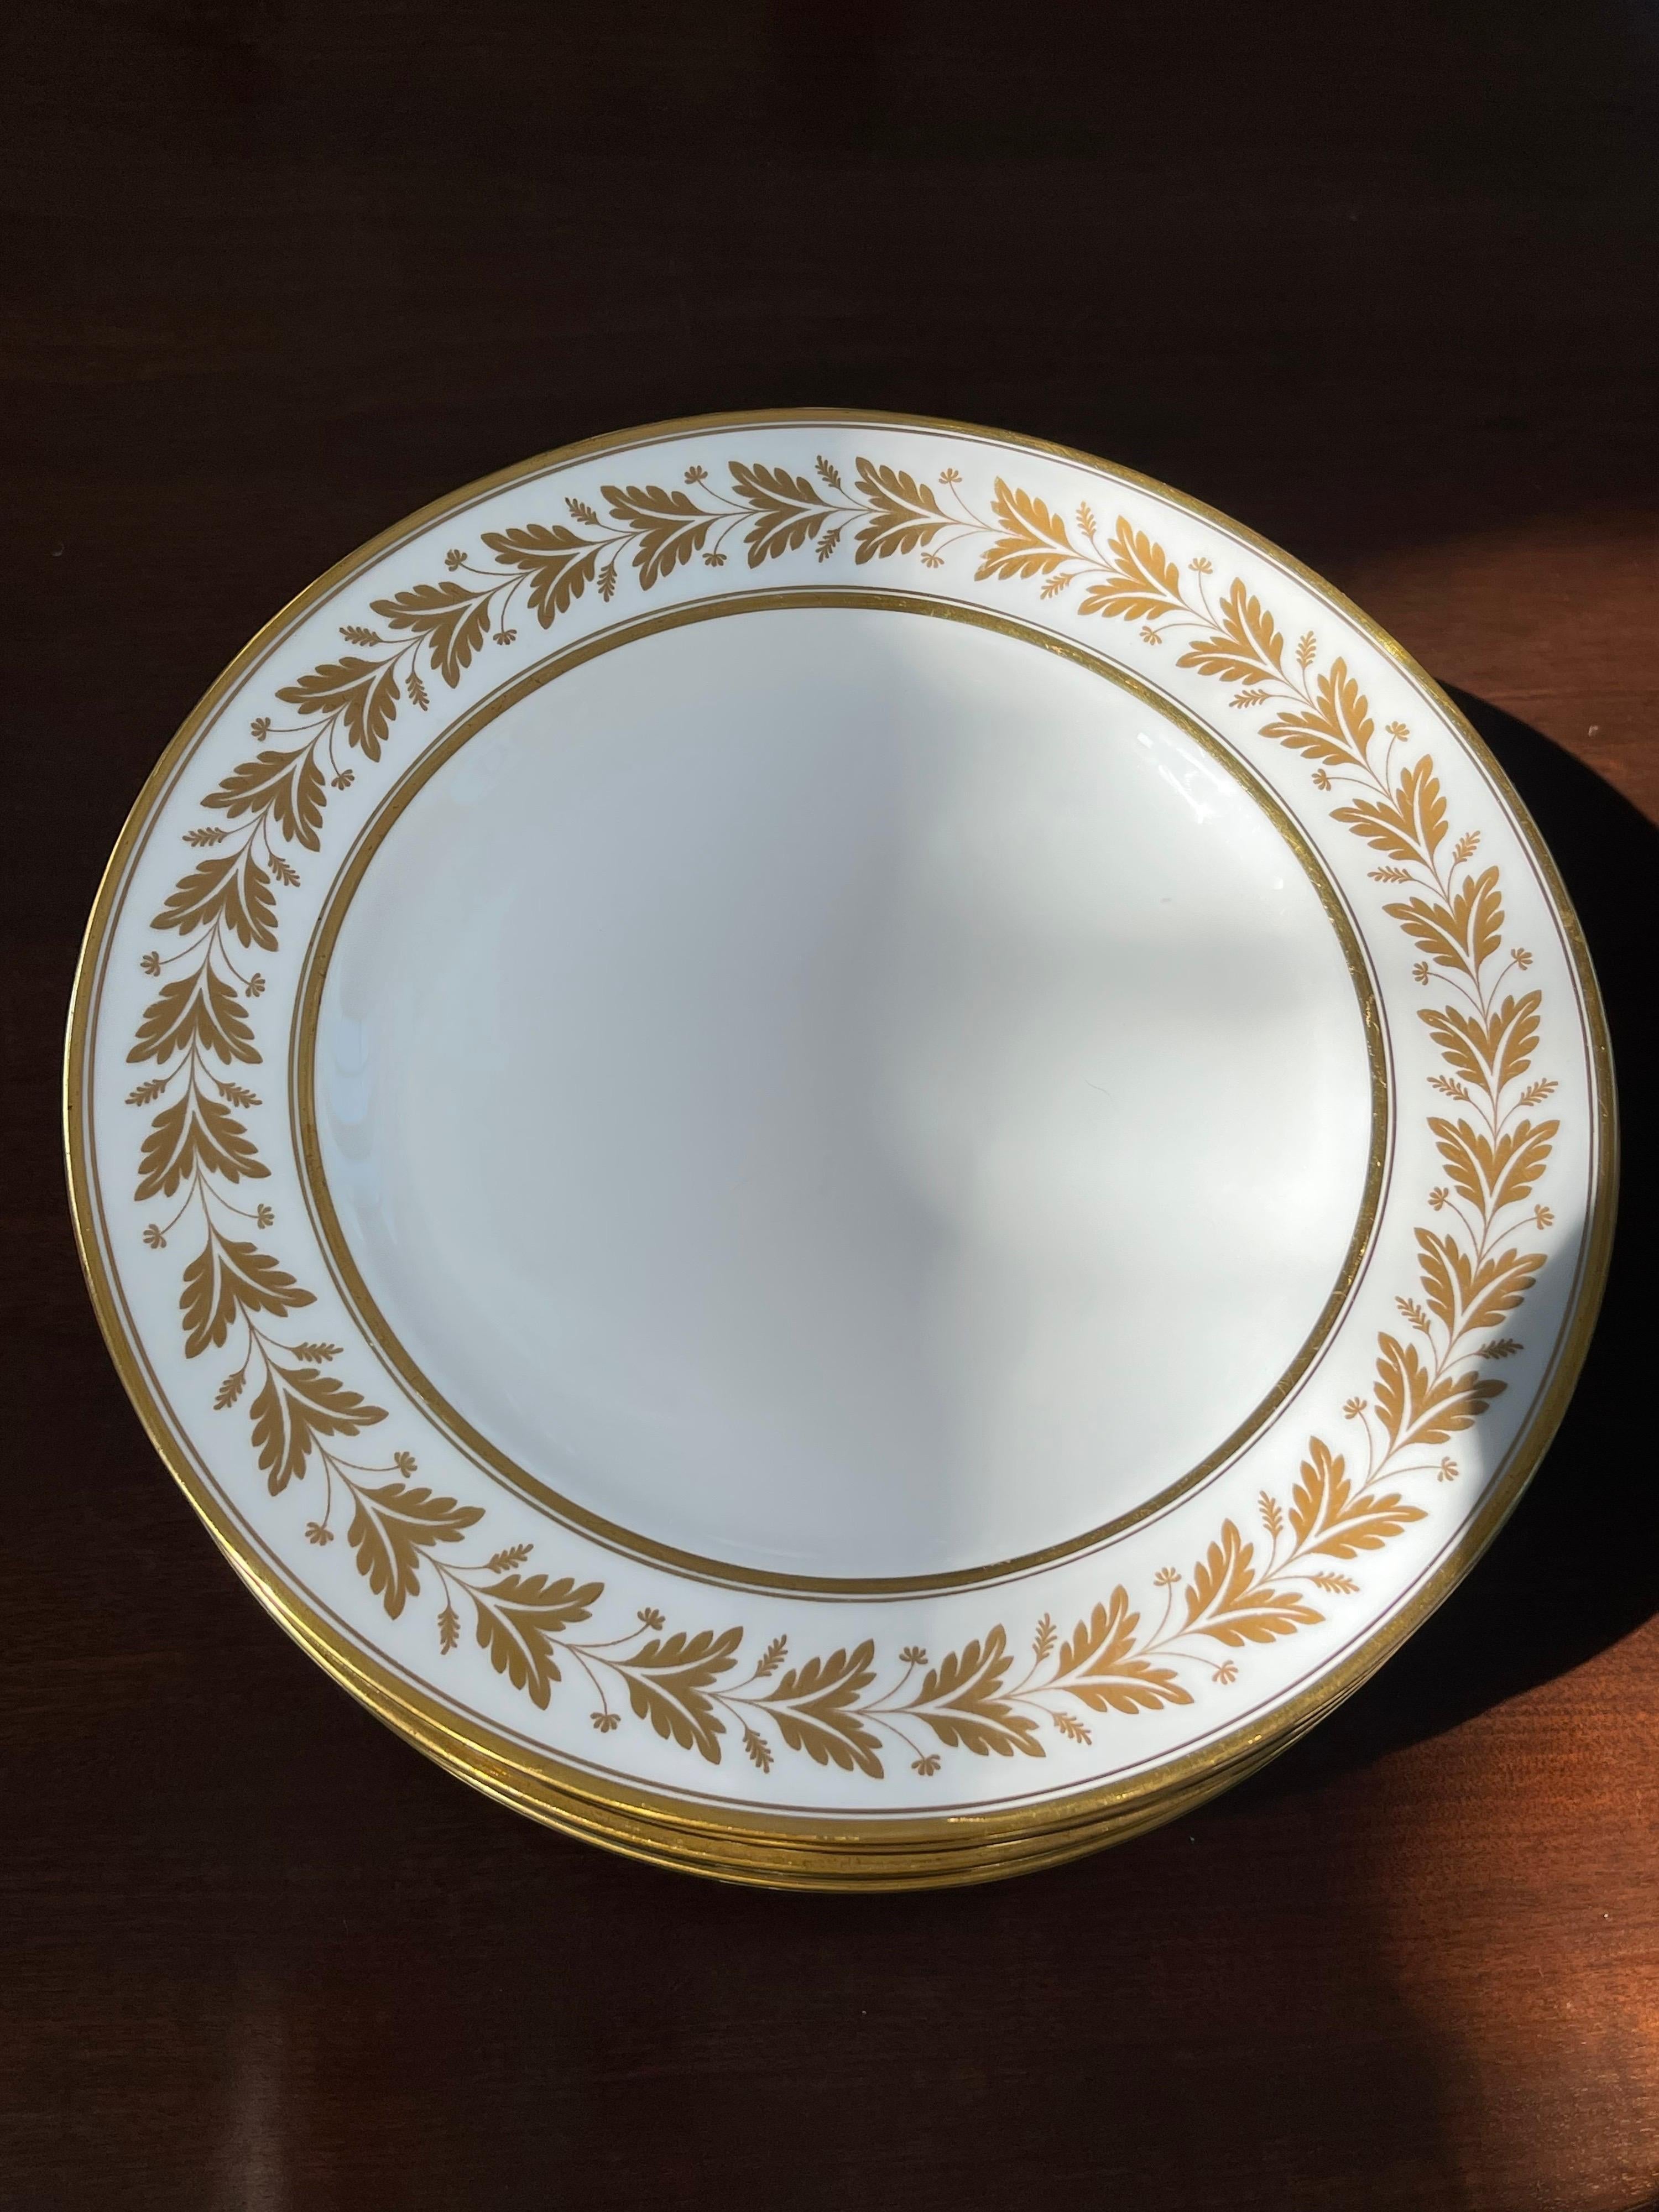 Set of 12 Spode Copeland Dinner Plates In Good Condition For Sale In New Haven, CT